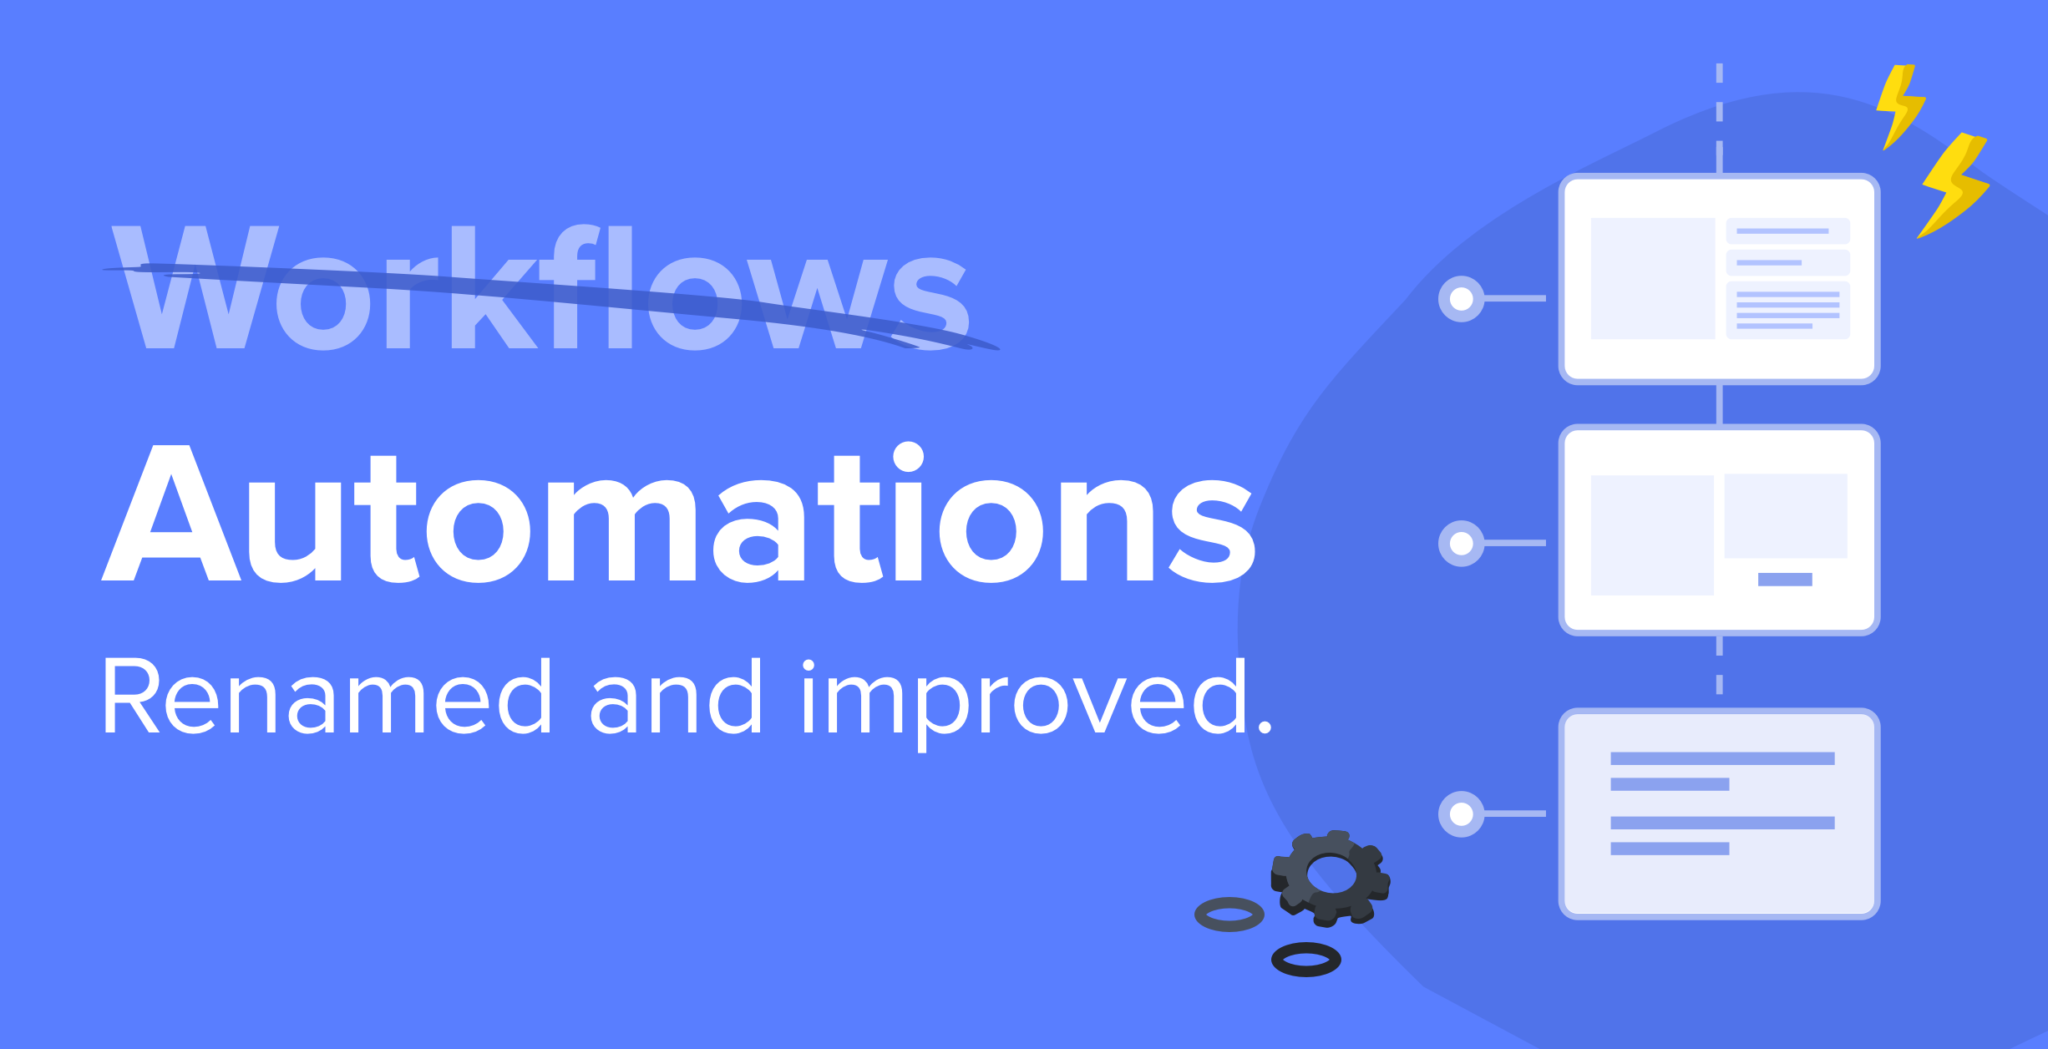 Automations renamed and improved